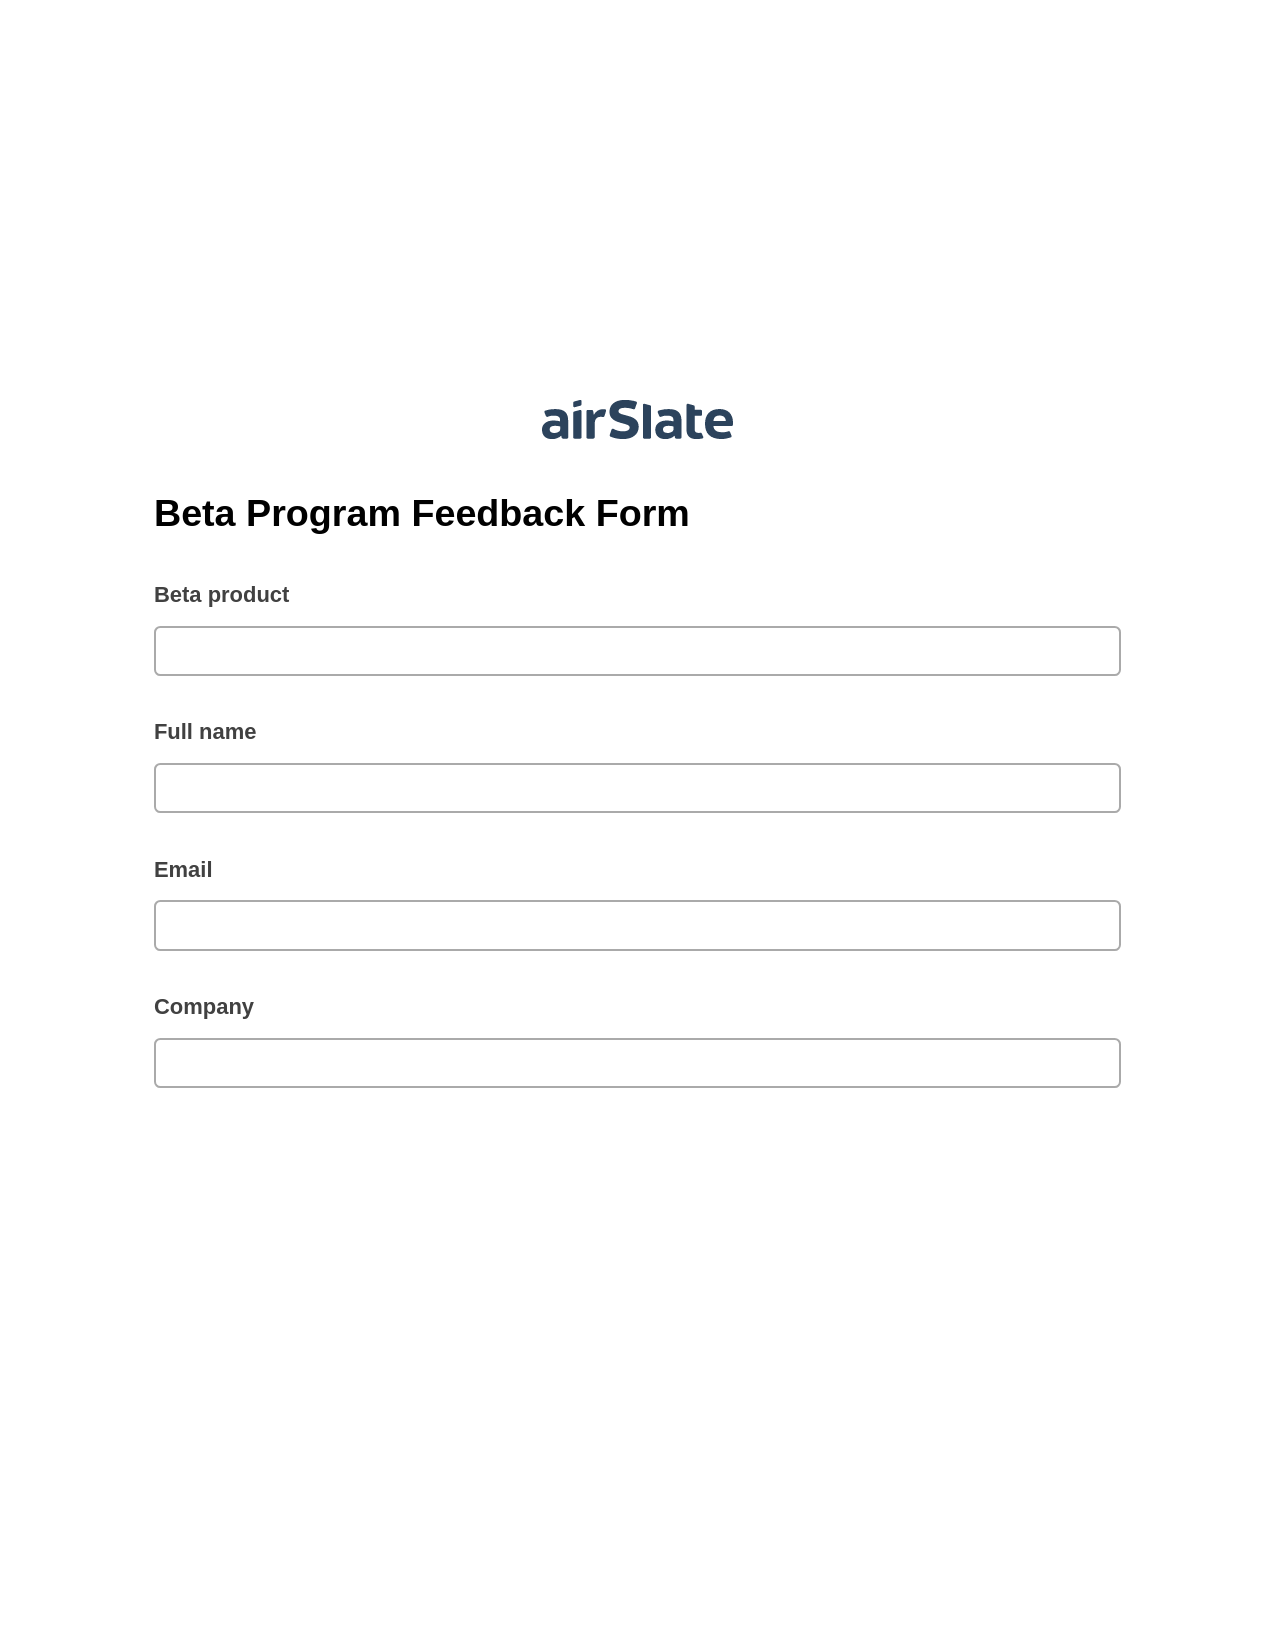 Beta Program Feedback Form Pre-fill from Salesforce Record Bot, Roles Reminder Bot, Export to Smartsheet